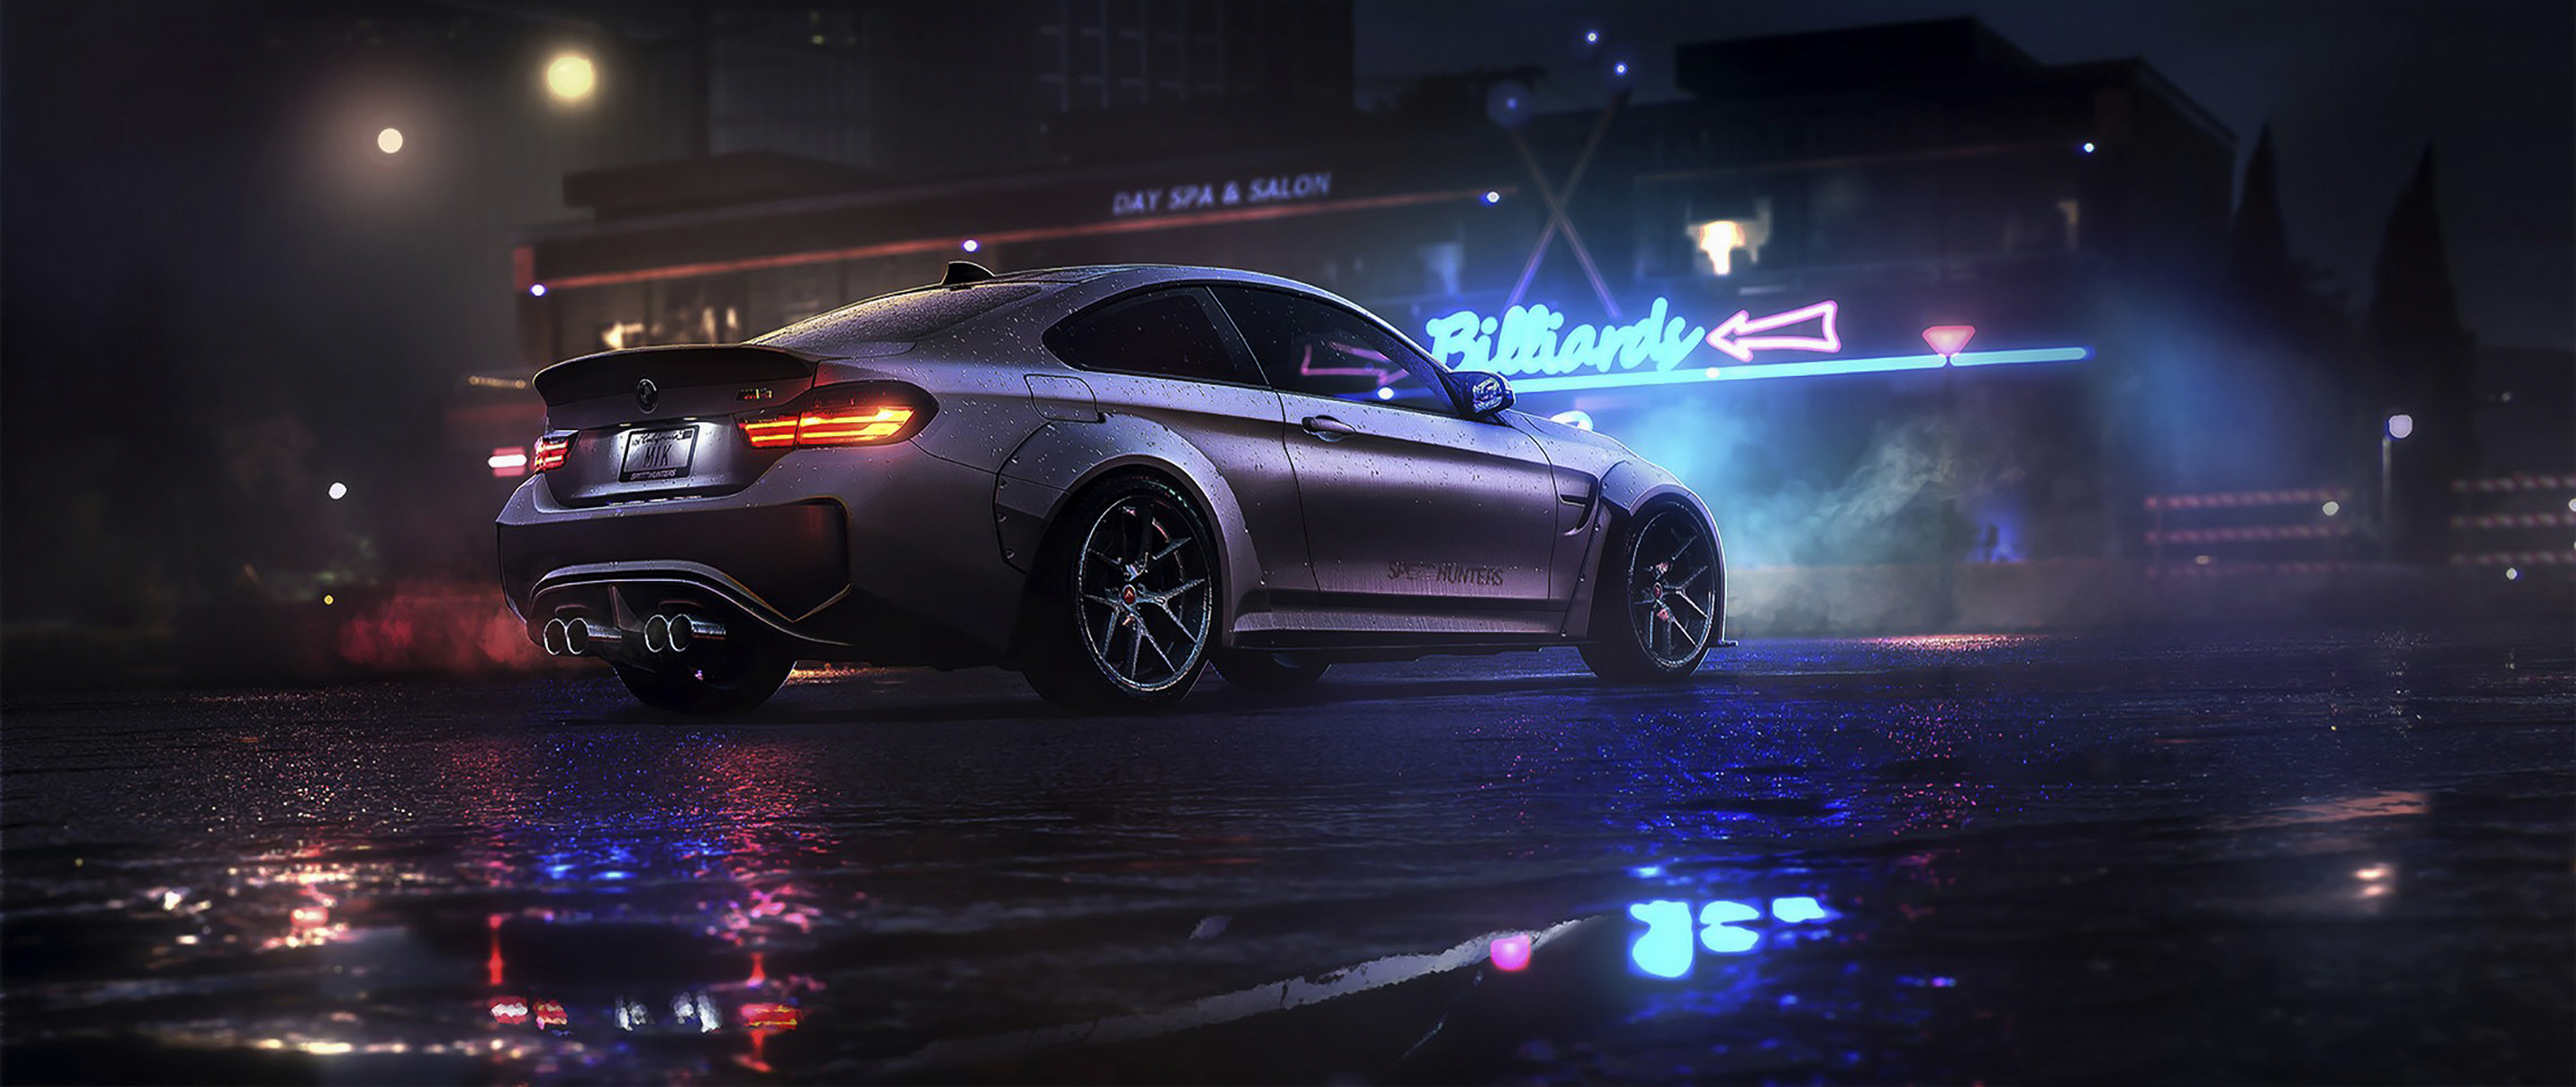 Bmw Gt Need For Speed 4k Wallpaperhd Cars Wallpapers4k Wallpapers